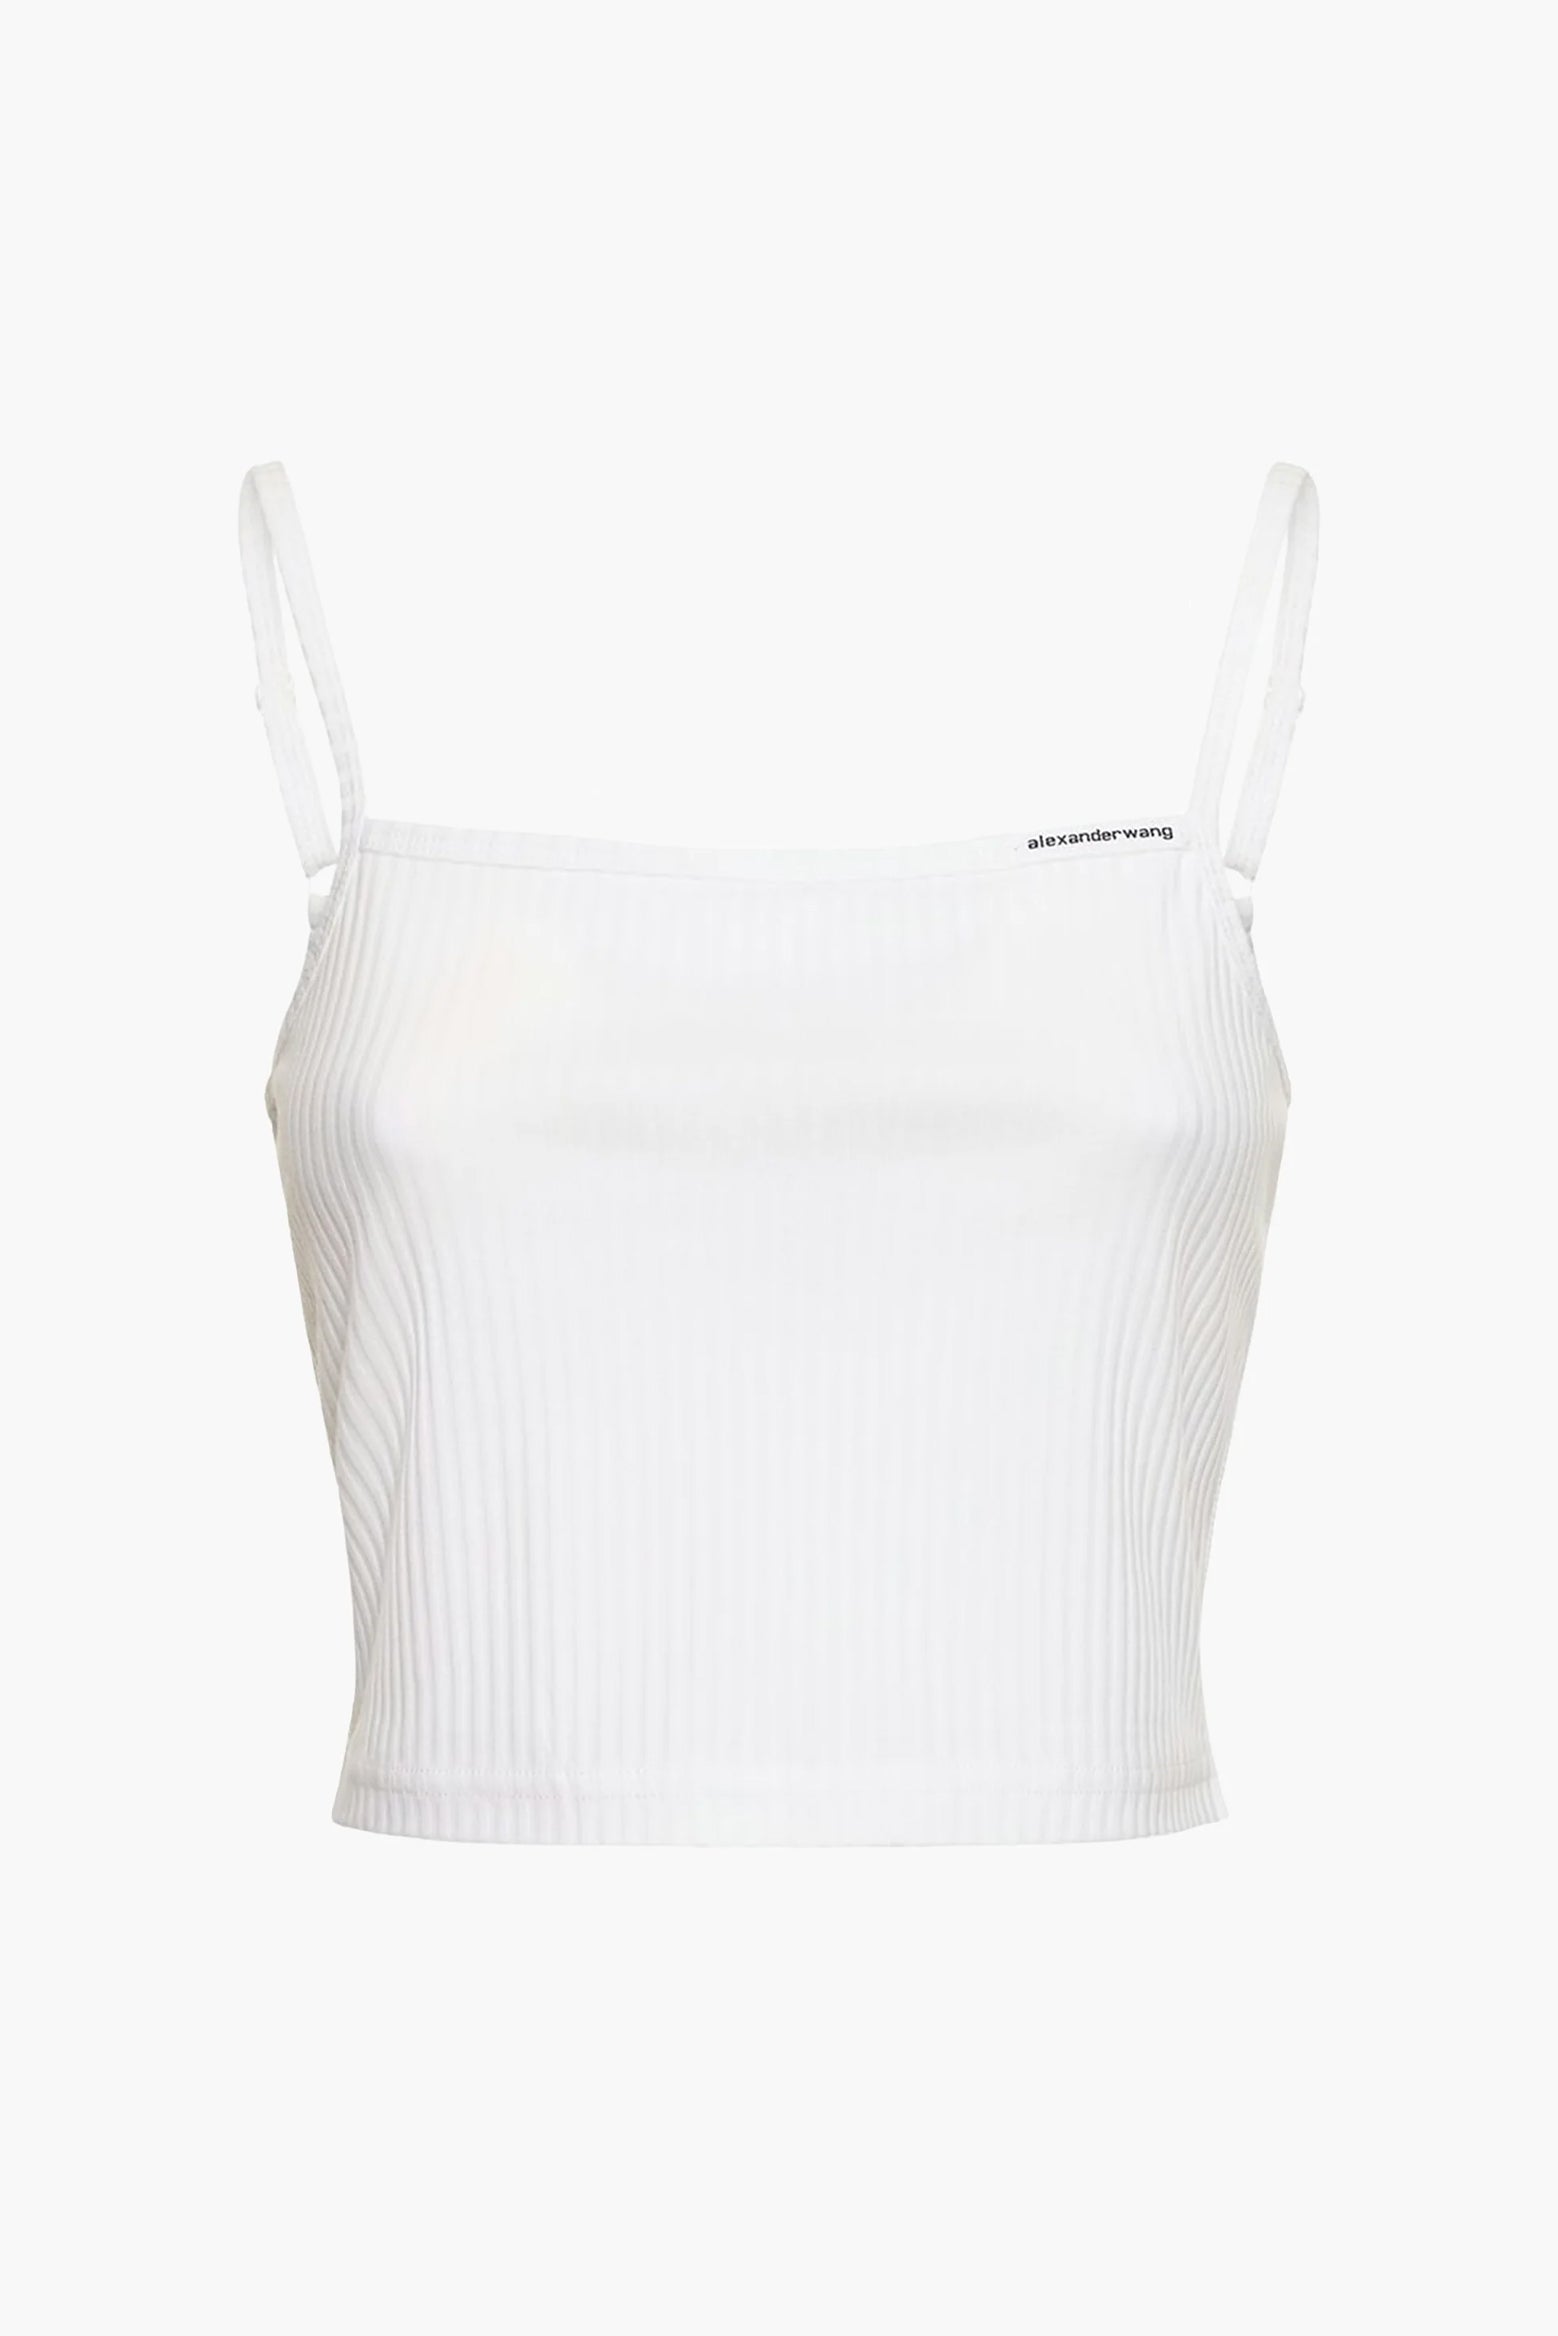 The Alexander Wang Cami Top W Skinny Woven Label in White available at The New Trend Australia